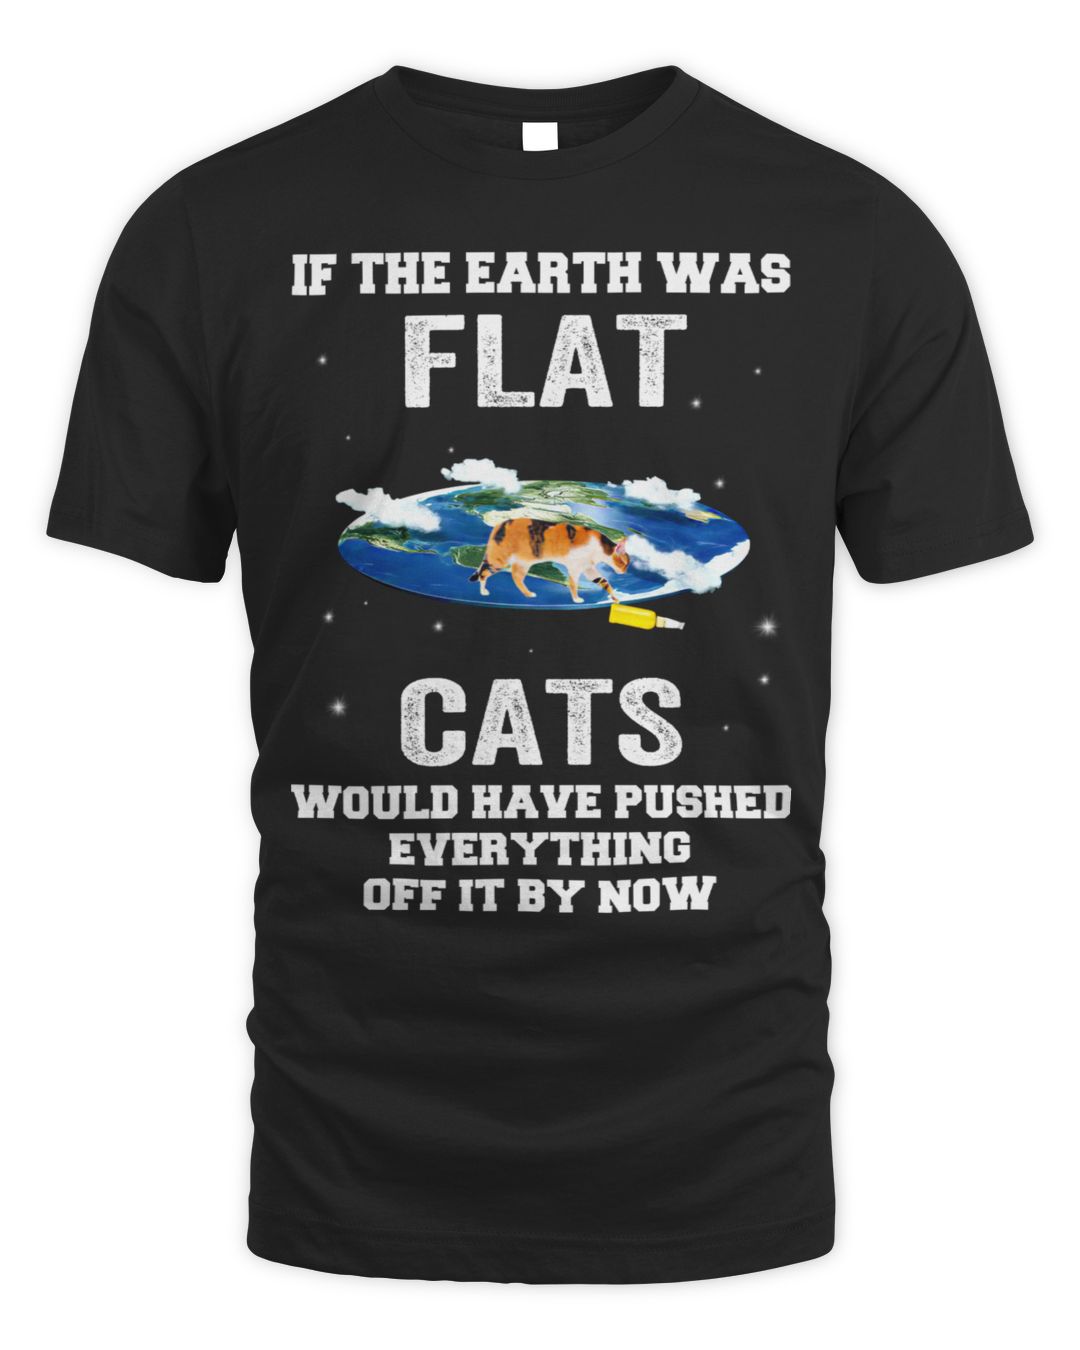 IF THE EARTH WAS FLAT | Science Store